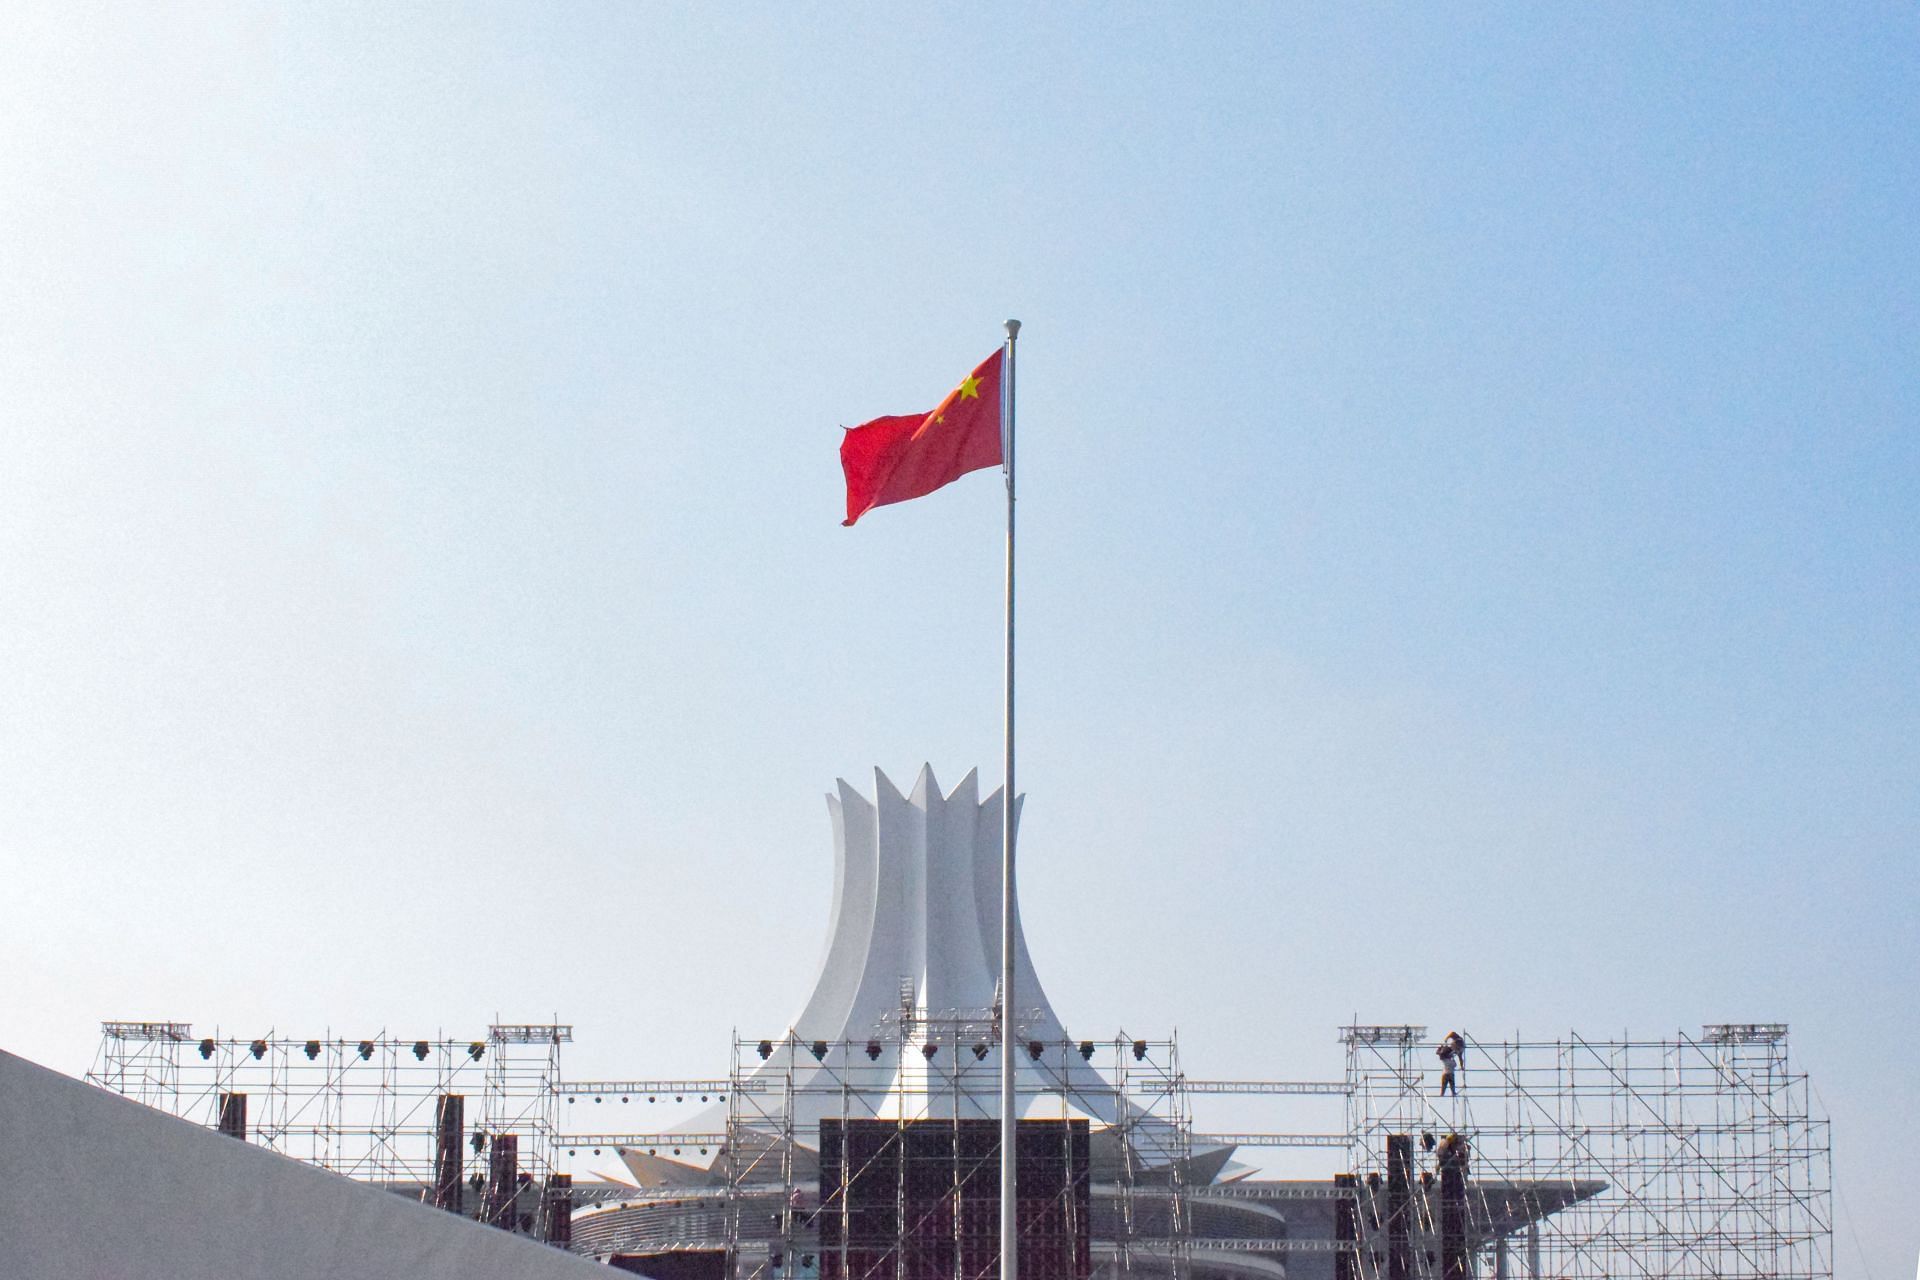 China PR were awarded the hosting rights to the 2023 Asian Cup in June 2019. (Image Courtesy: Unsplash)